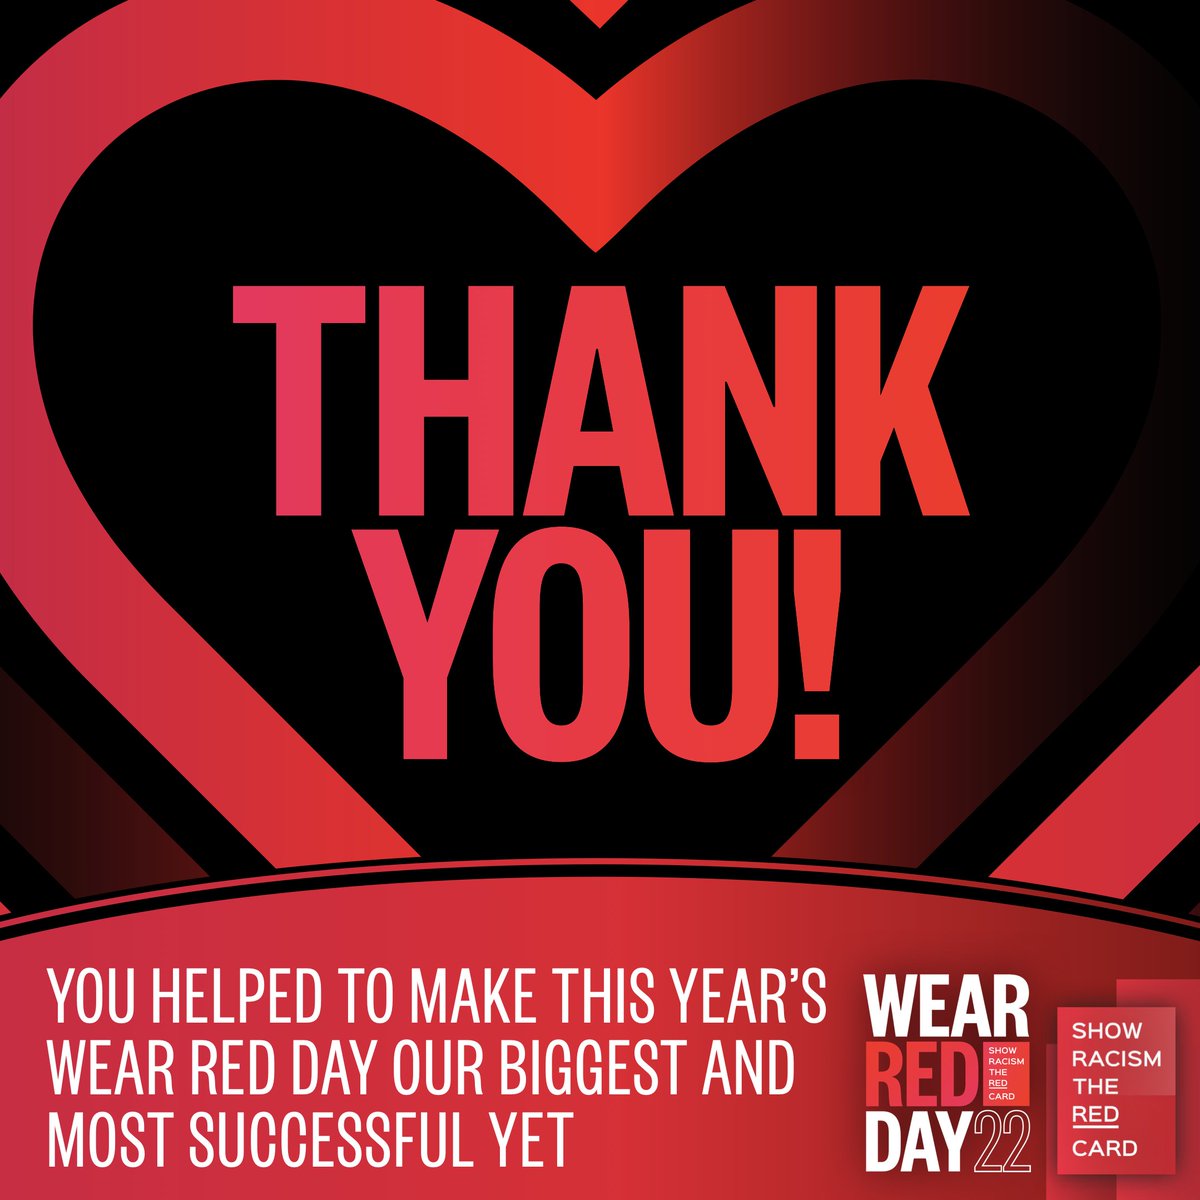 #WRD22: THANK YOU ❤️ Every year we're blown away with your support for Wear Red Day. Your donations allow us to continue providing our comprehensive anti-racism education across the UK. 🔗 theredcard.org/wear-red-day